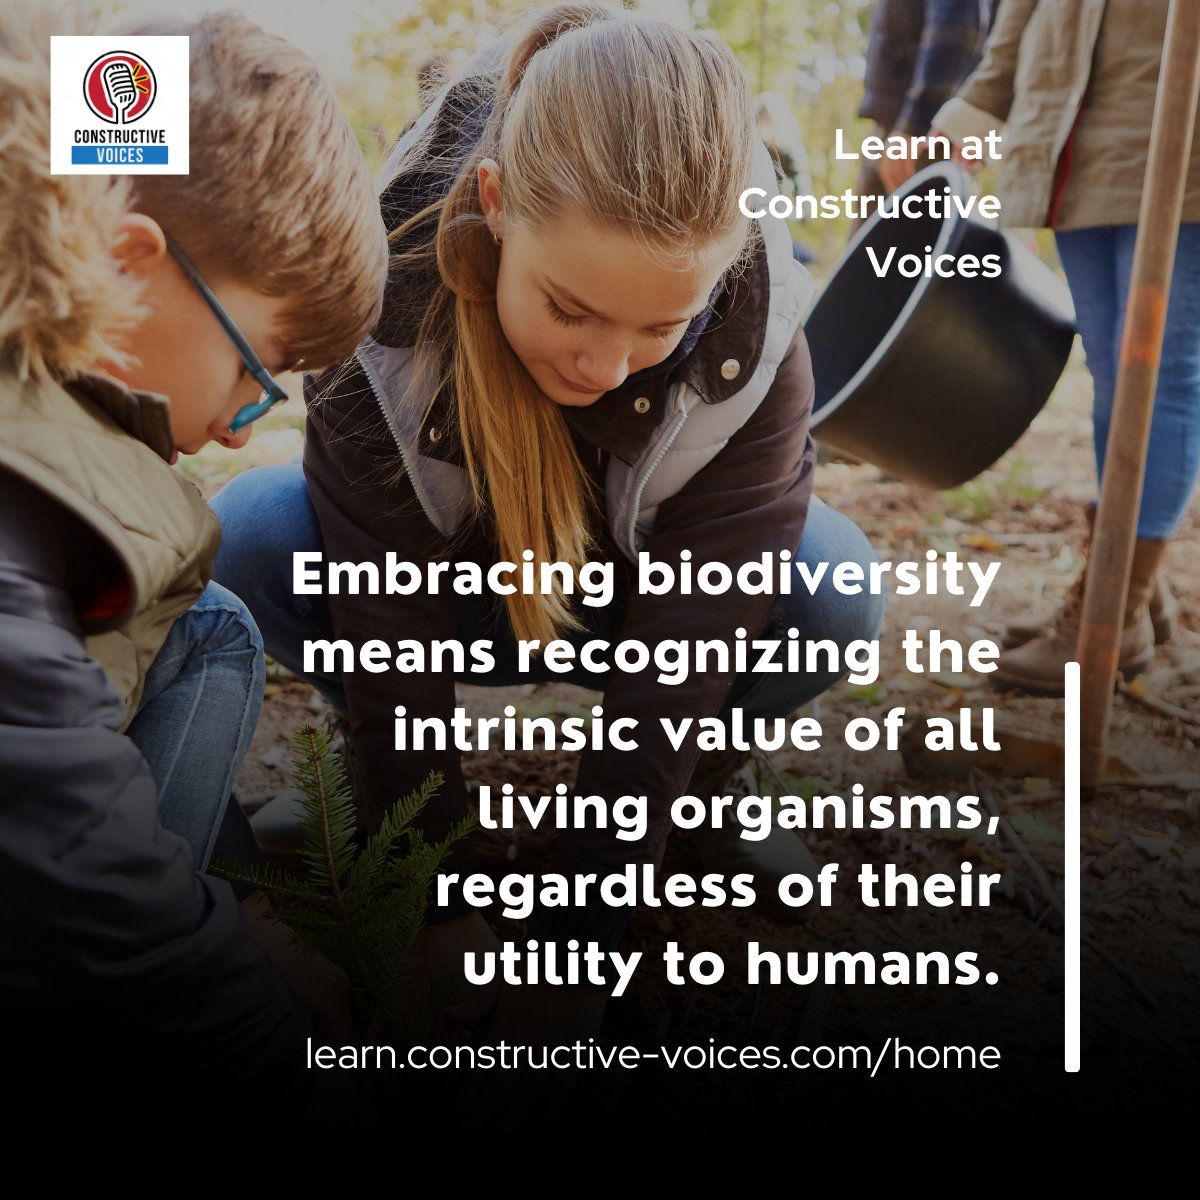 'Embracing biodiversity means recognising the intrinsic value of all living organisms, regardless of their utility to humans.' #biodiversity #biodiversitynetgain #training - learn.constructive-voices.com/home/